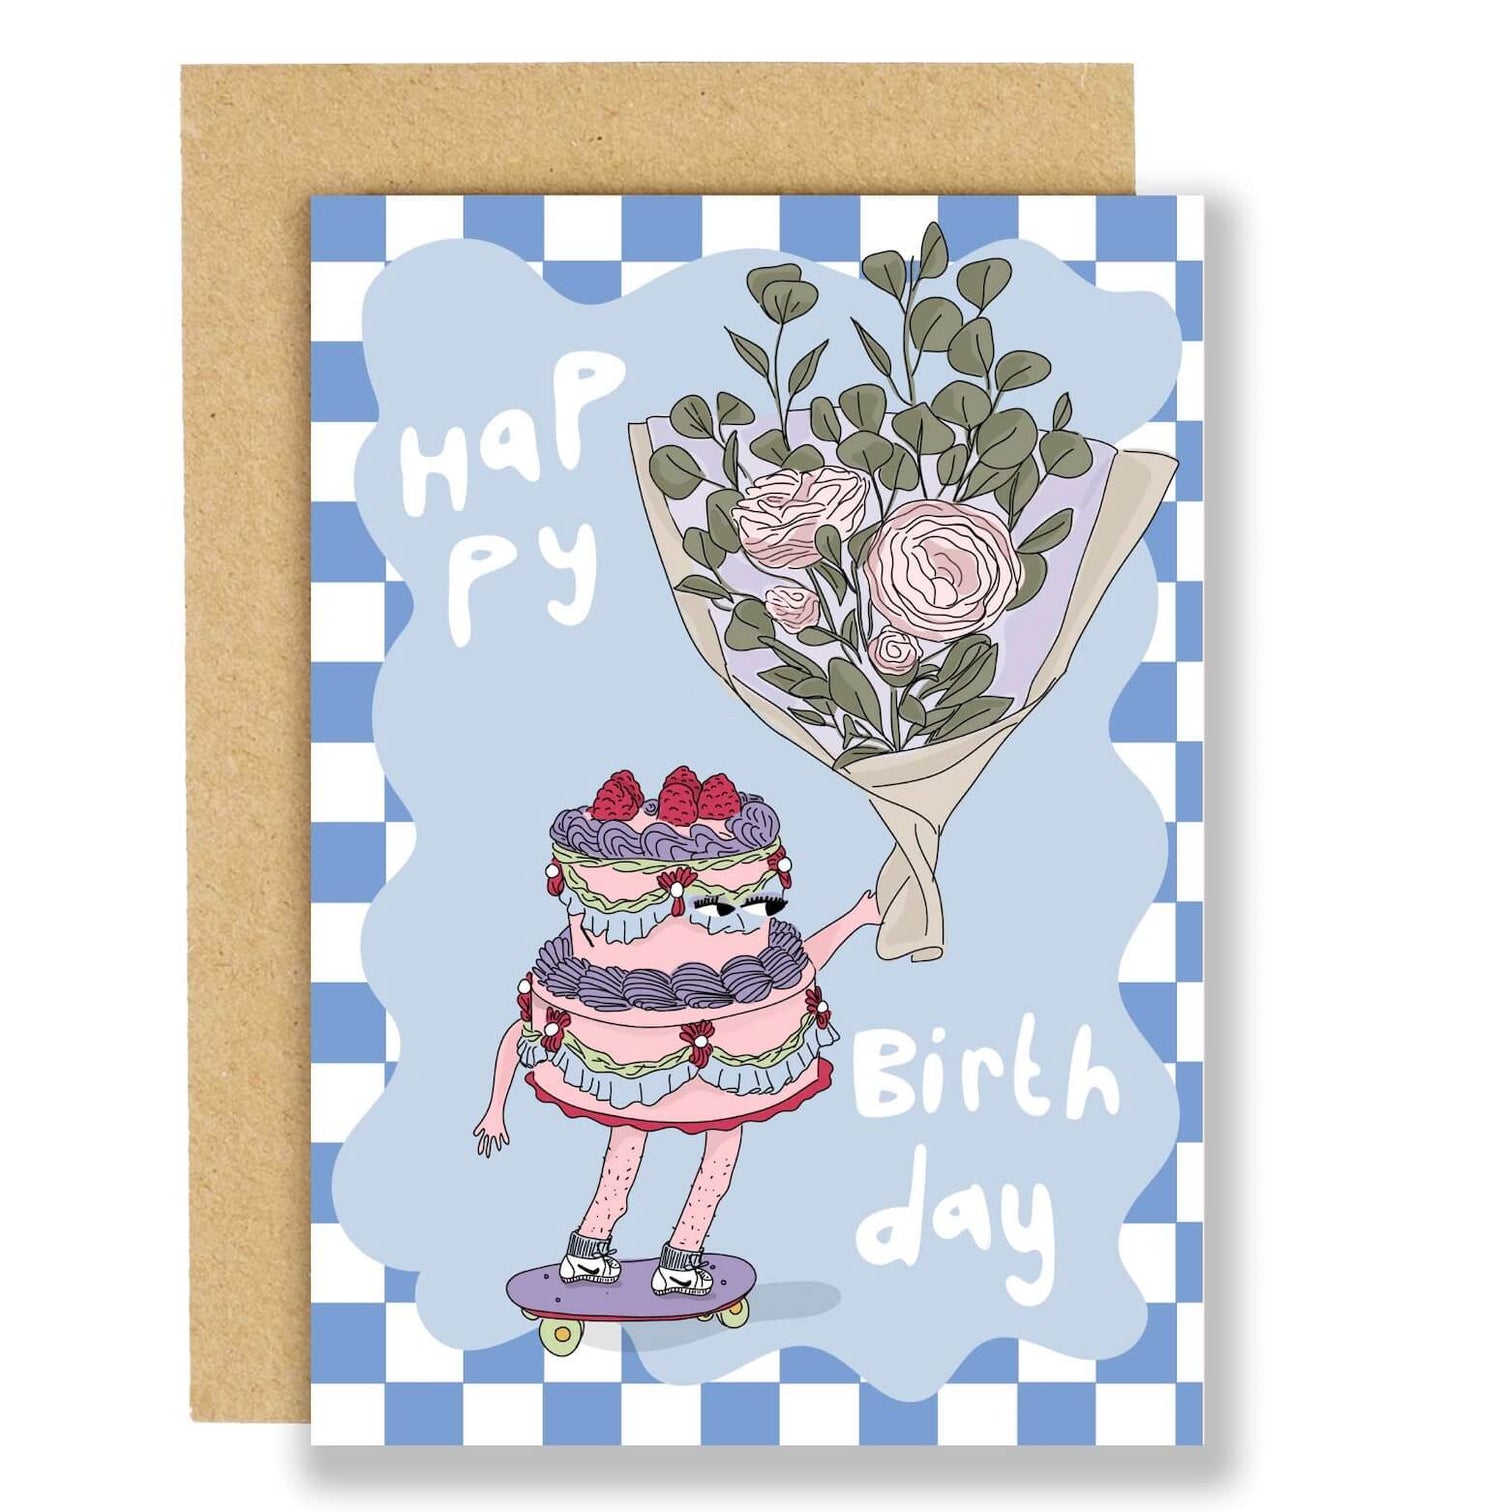 Cool birthday cards for her